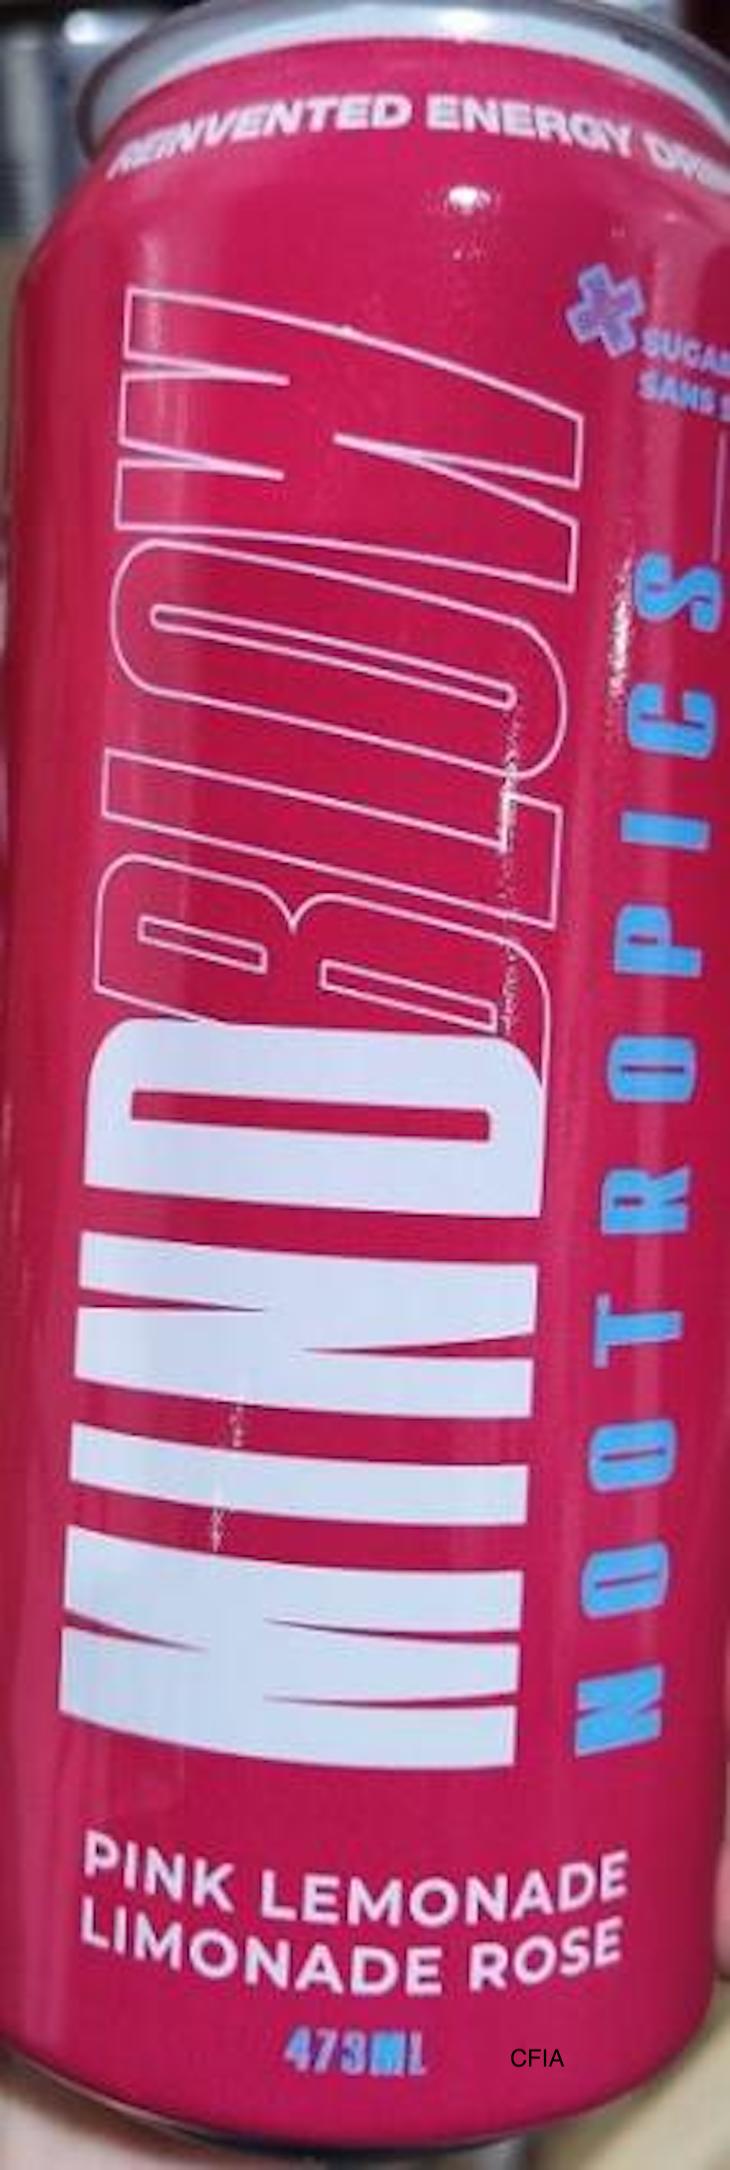 Mindblow Energy Drinks Recalled in Canada For Non Permitted Ingredient